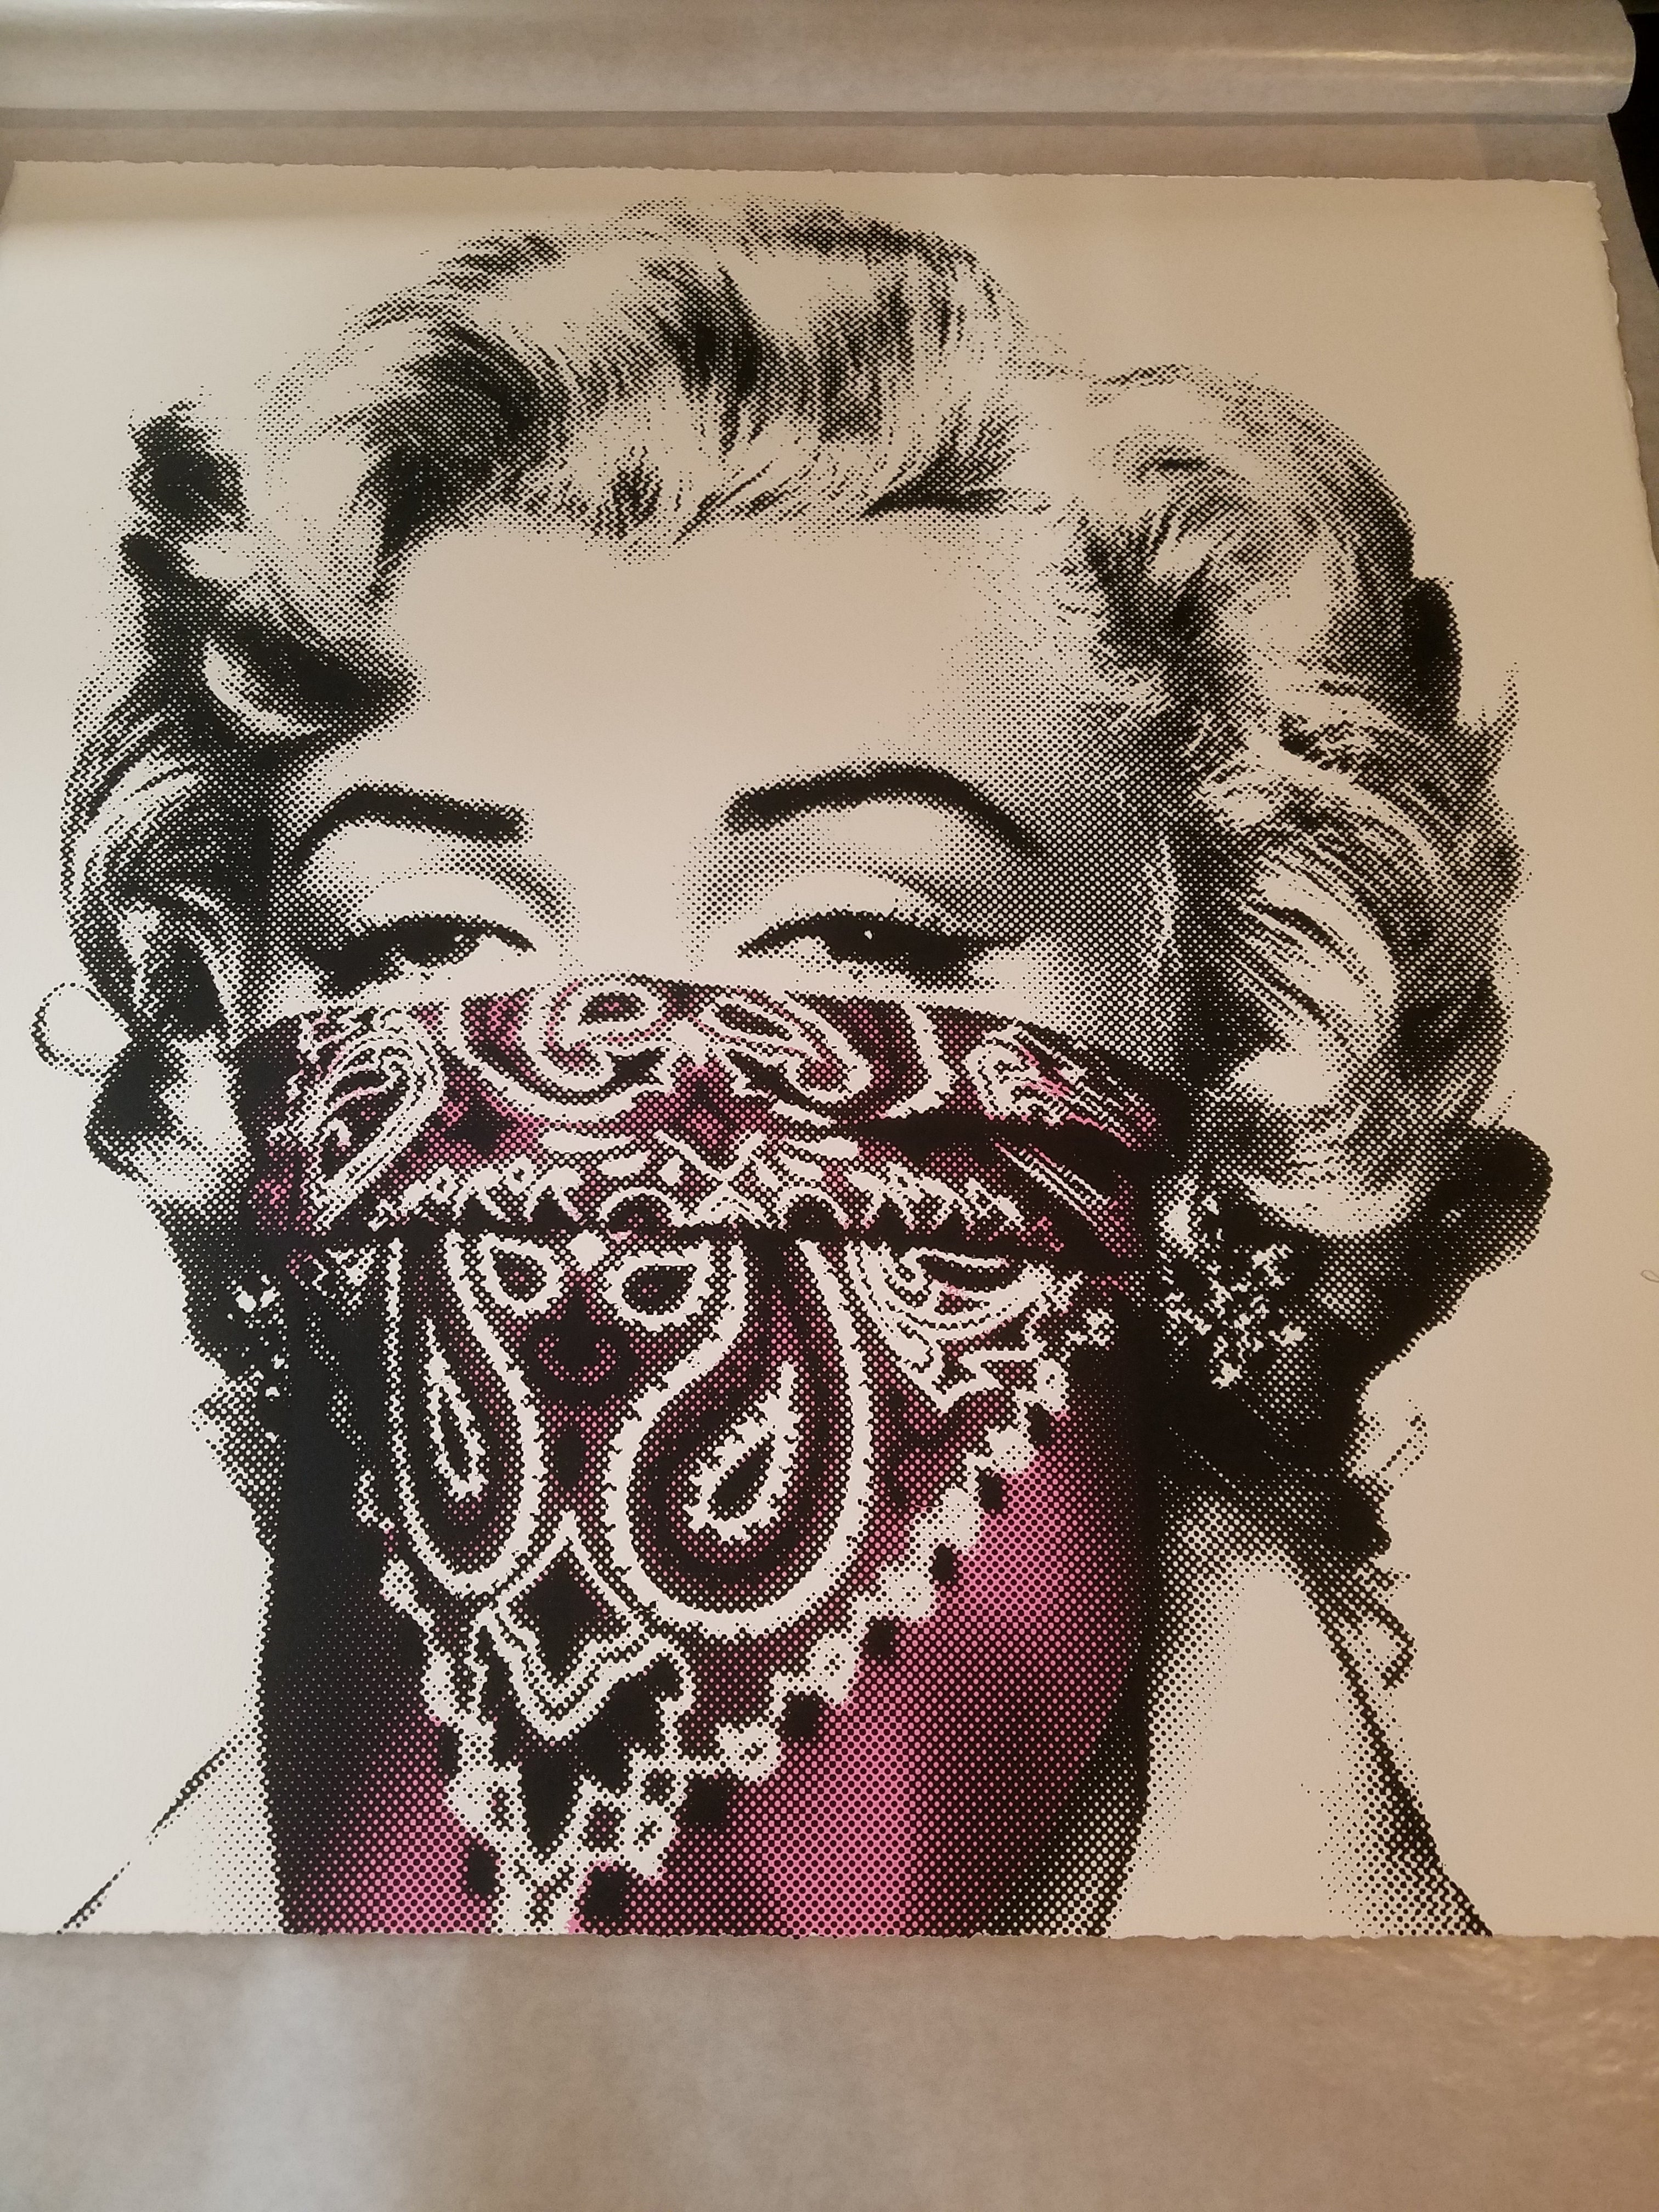 Title:  STAY SAFE PINK xx/50 Marilyn Monroe MBW poster Poster artist: Mr. Brainwash Edition: xx/50 Type: Screen Print Size: 22" x 22" Notes:  Limited Edition Print on paper. Two-color screen print on archival paper.  In celebration of Marilyn Monroe’s birthday on June 1st, we will be releasing a new limited edition screen print.  Each two-color screen print is hand-torn, signed, and numbered with a thumbprint on the back.